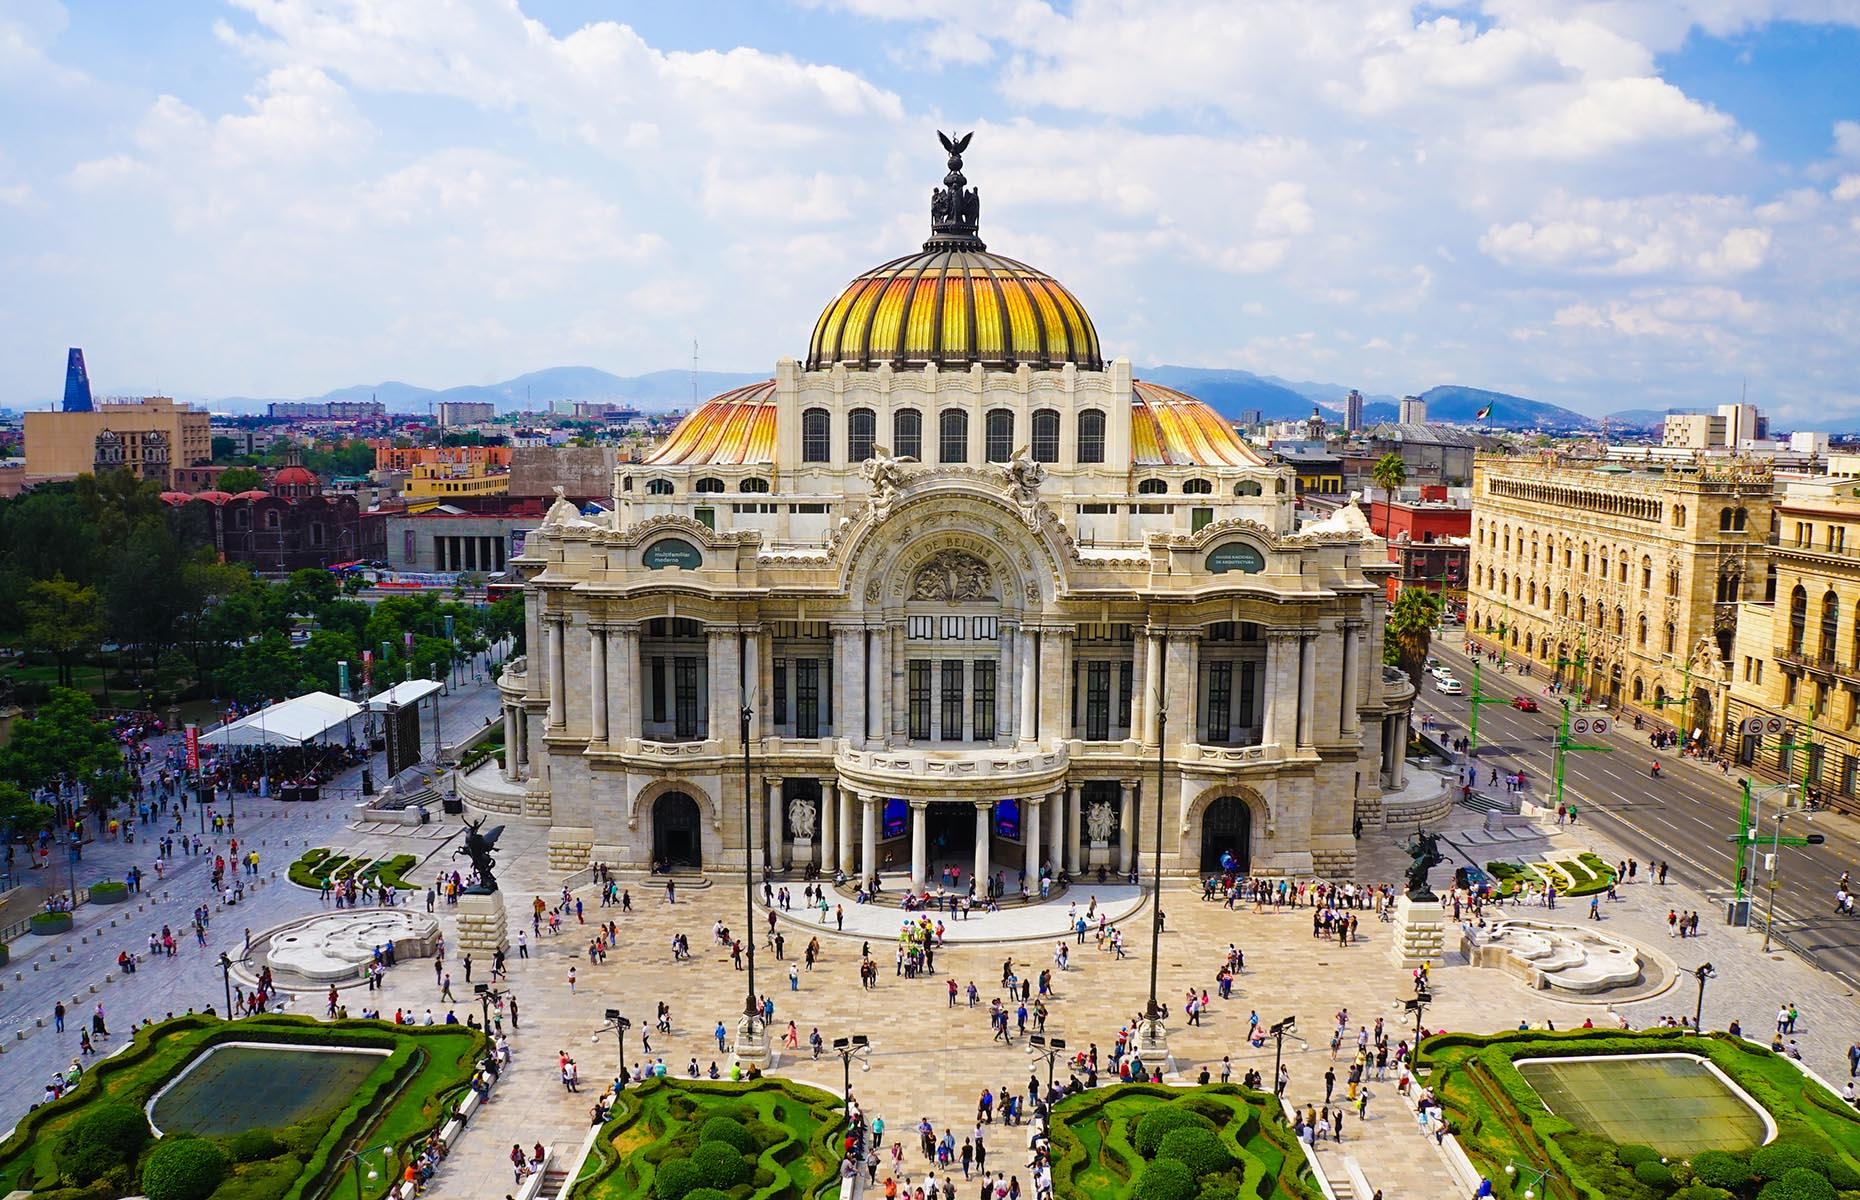 There is no end to Mexico City's charm. From leafy suburbs like Coyoacán and laid-back San Ángel to the excavated Aztec Templo Mayor, this cosmopolitan and beautiful place has lots to offer. The food scene is world-renowned and its famous Palacio de Bellas Artes (pictured) is one of the most significant cultural centres in the capital.